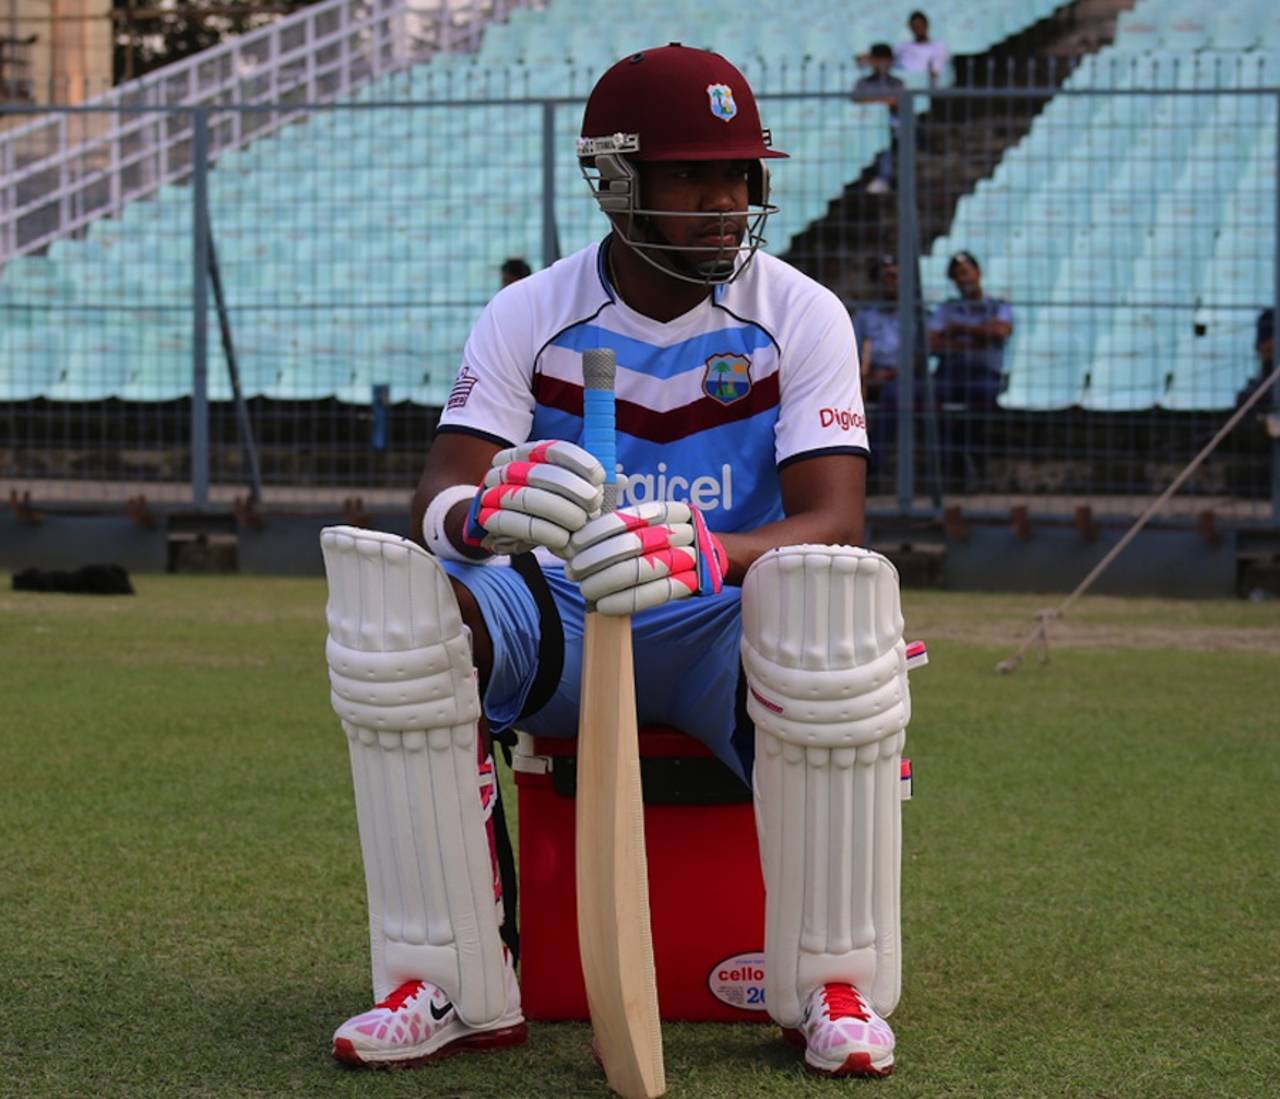 Darren Bravo has a history of withdrawing from overseas tours for "personal reasons"&nbsp;&nbsp;&bull;&nbsp;&nbsp;WICB